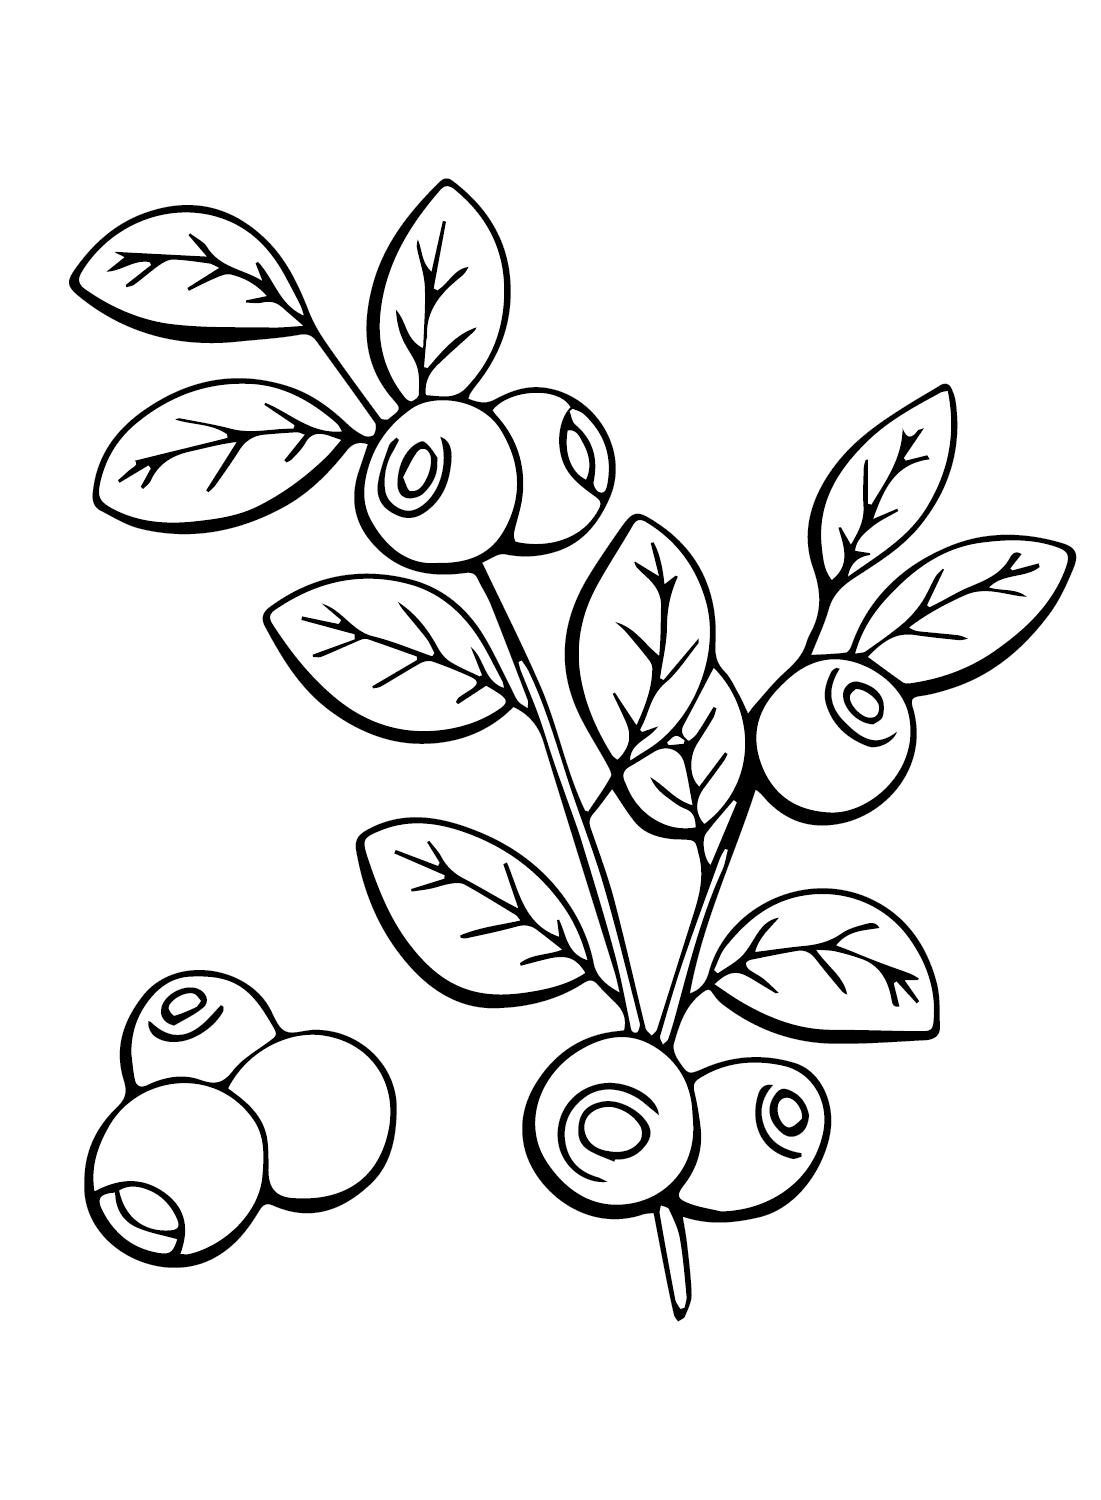 Huckleberry for Kids Coloring Page